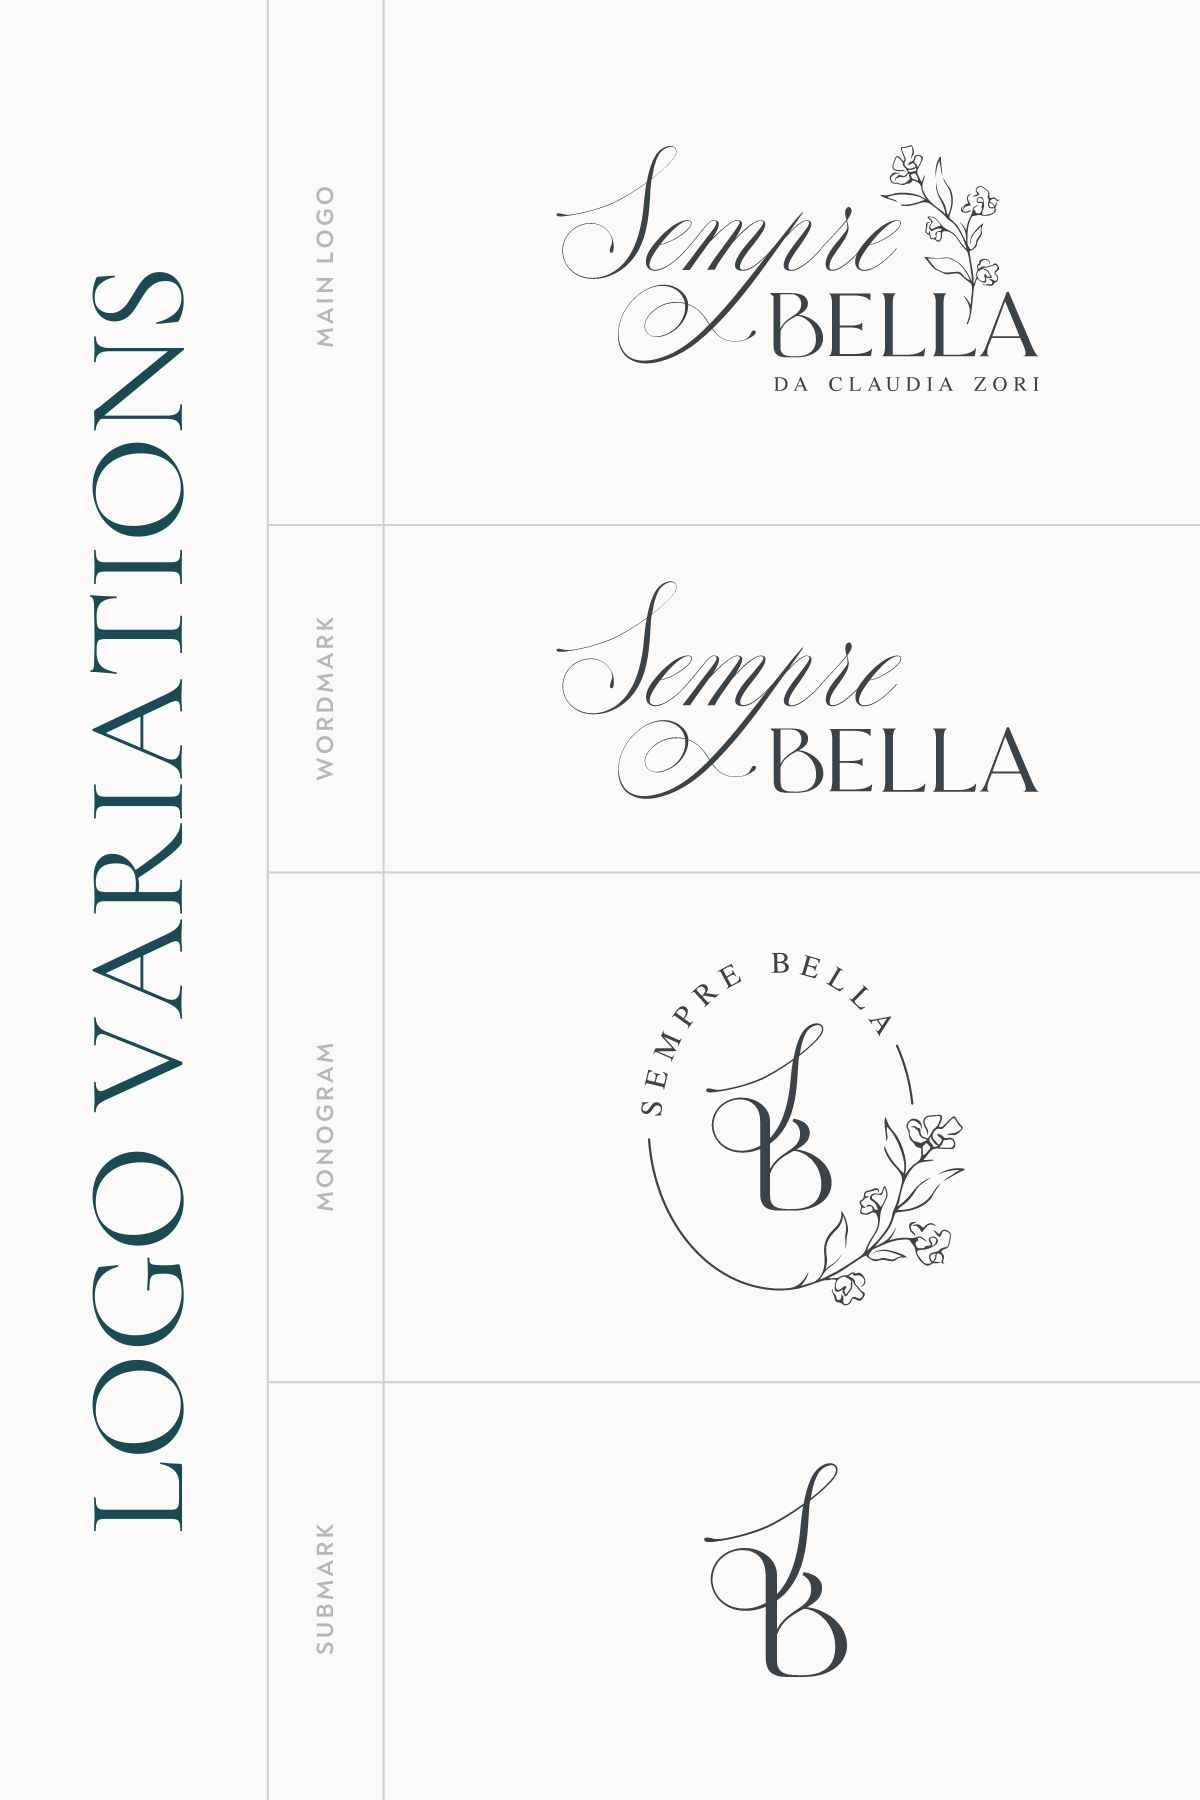 floral logo design variations for nail salon that include the main logo, wordmark, monogram logo and submark